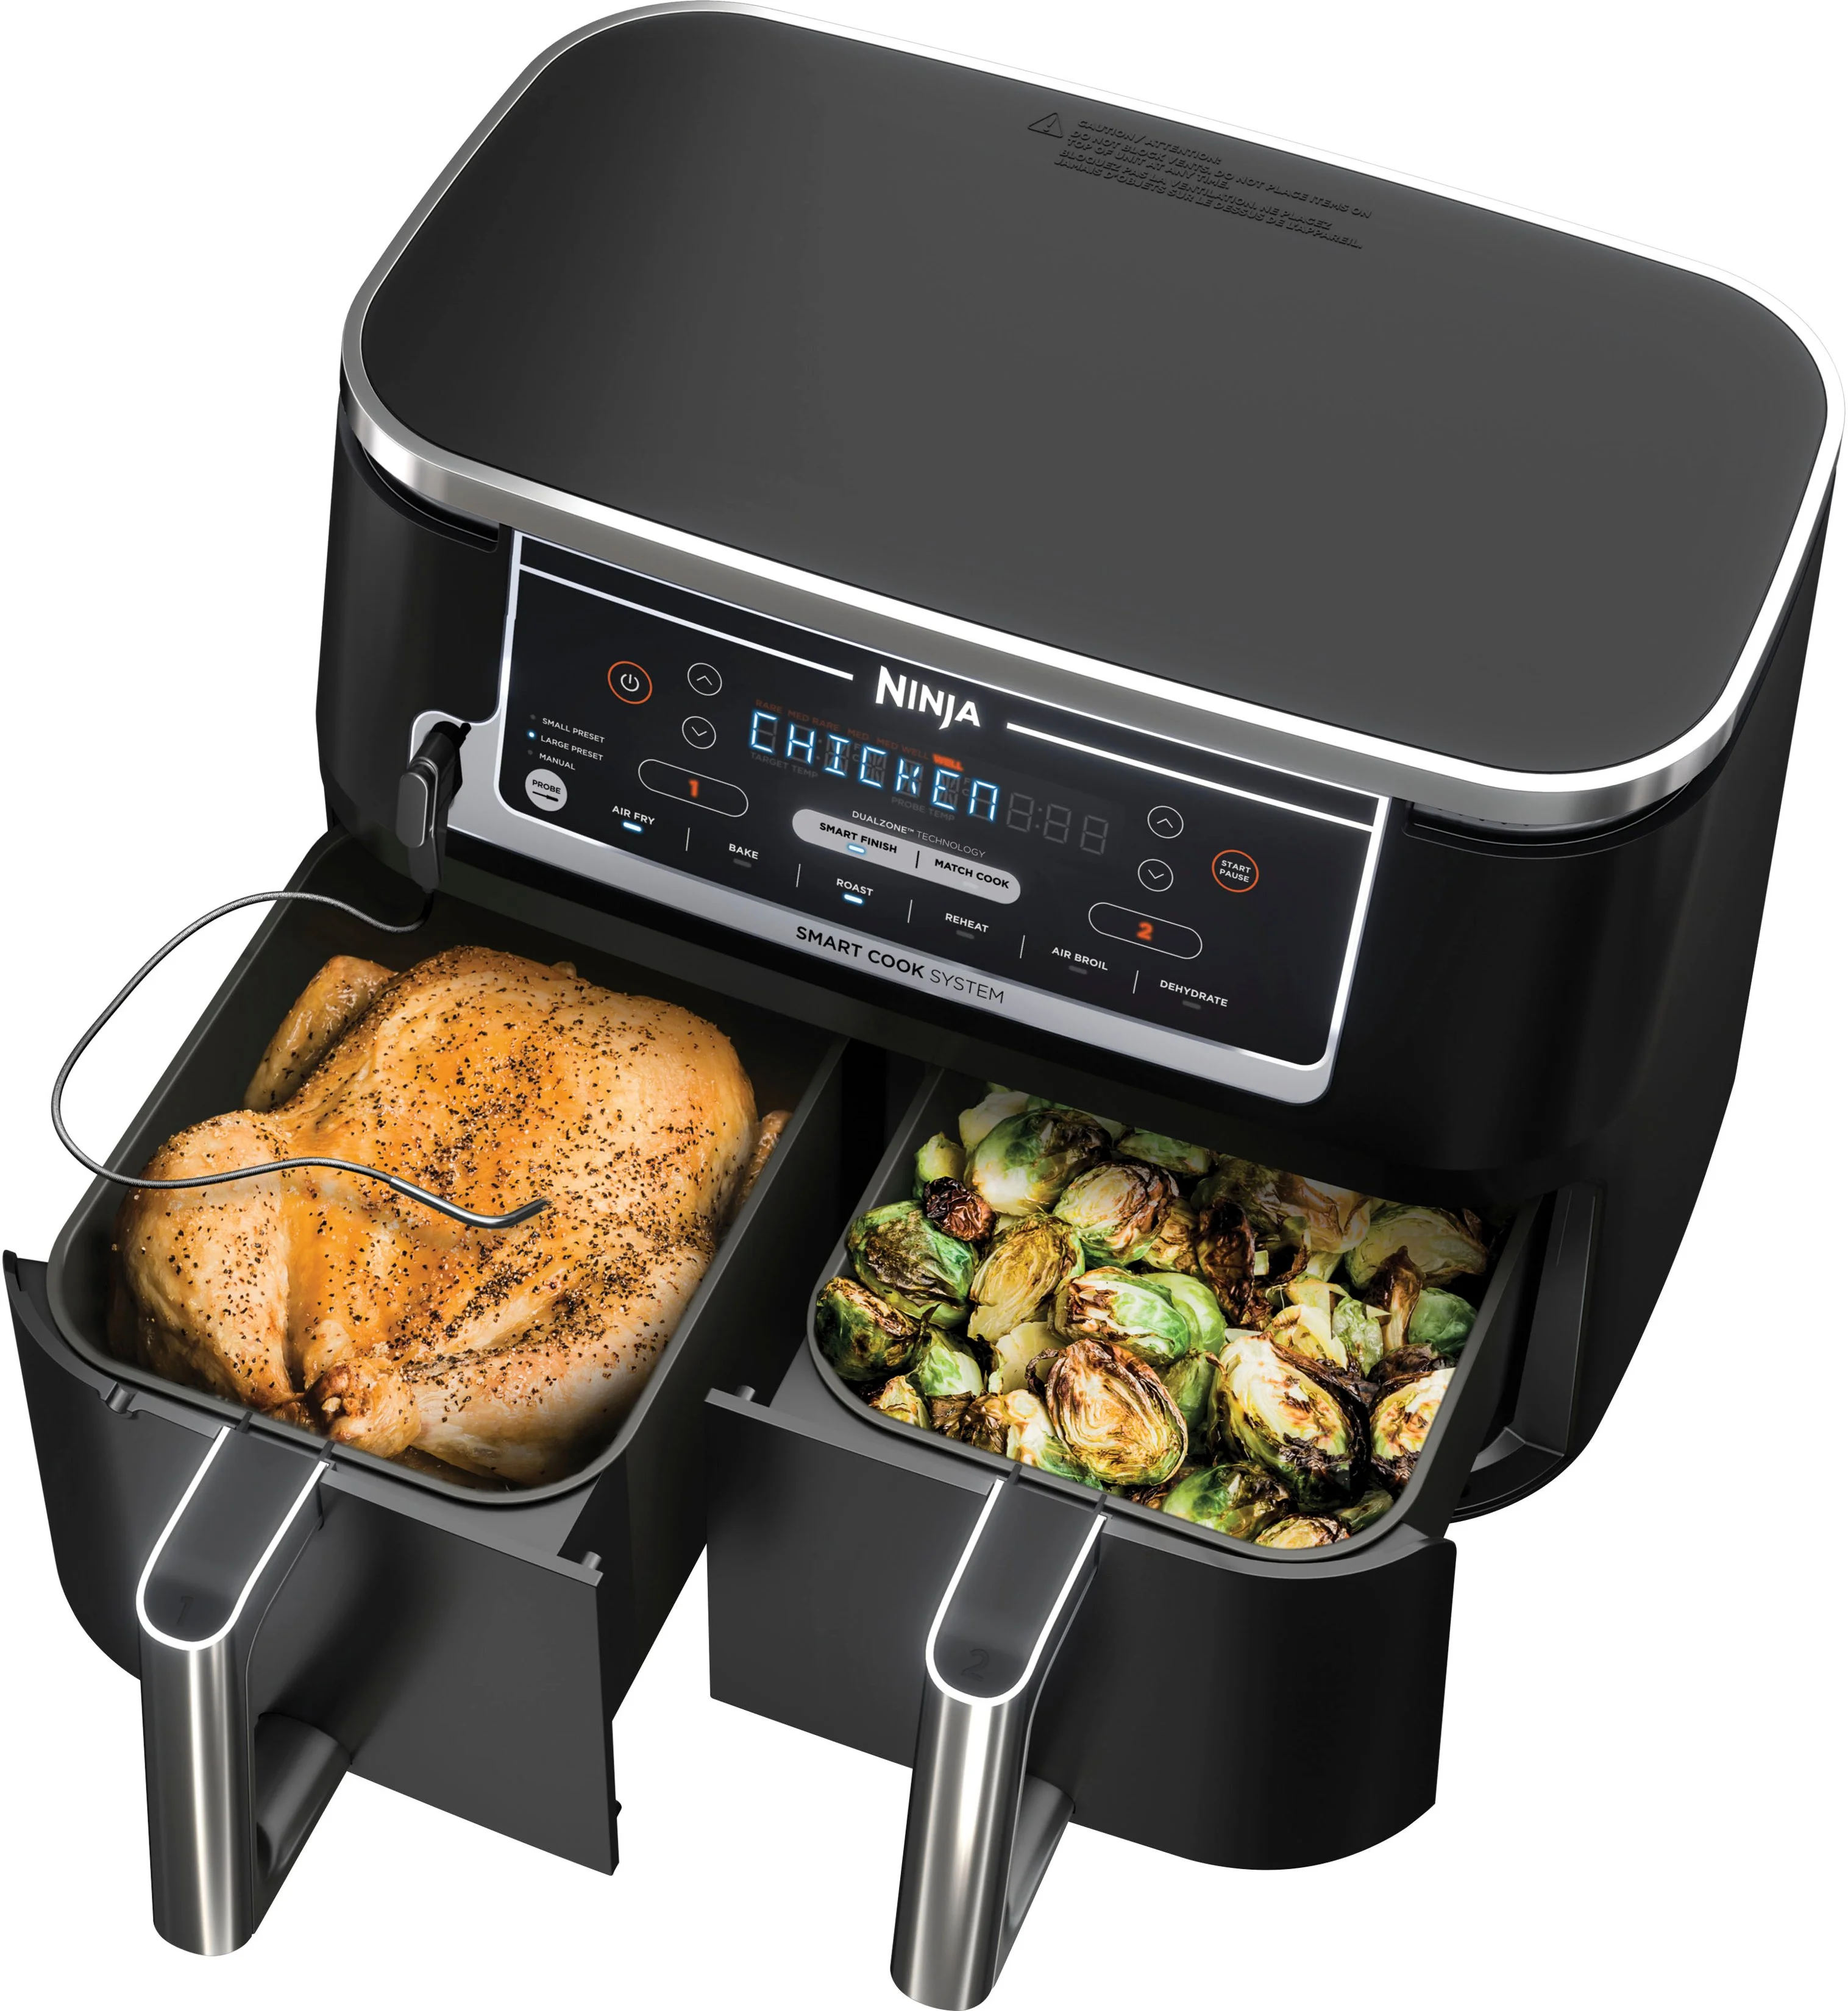 Ninja - Foodi 6-in-1 10-qt. XL 2-Basket Air Fryer with DualZone Technology and Smart Cook System - Black